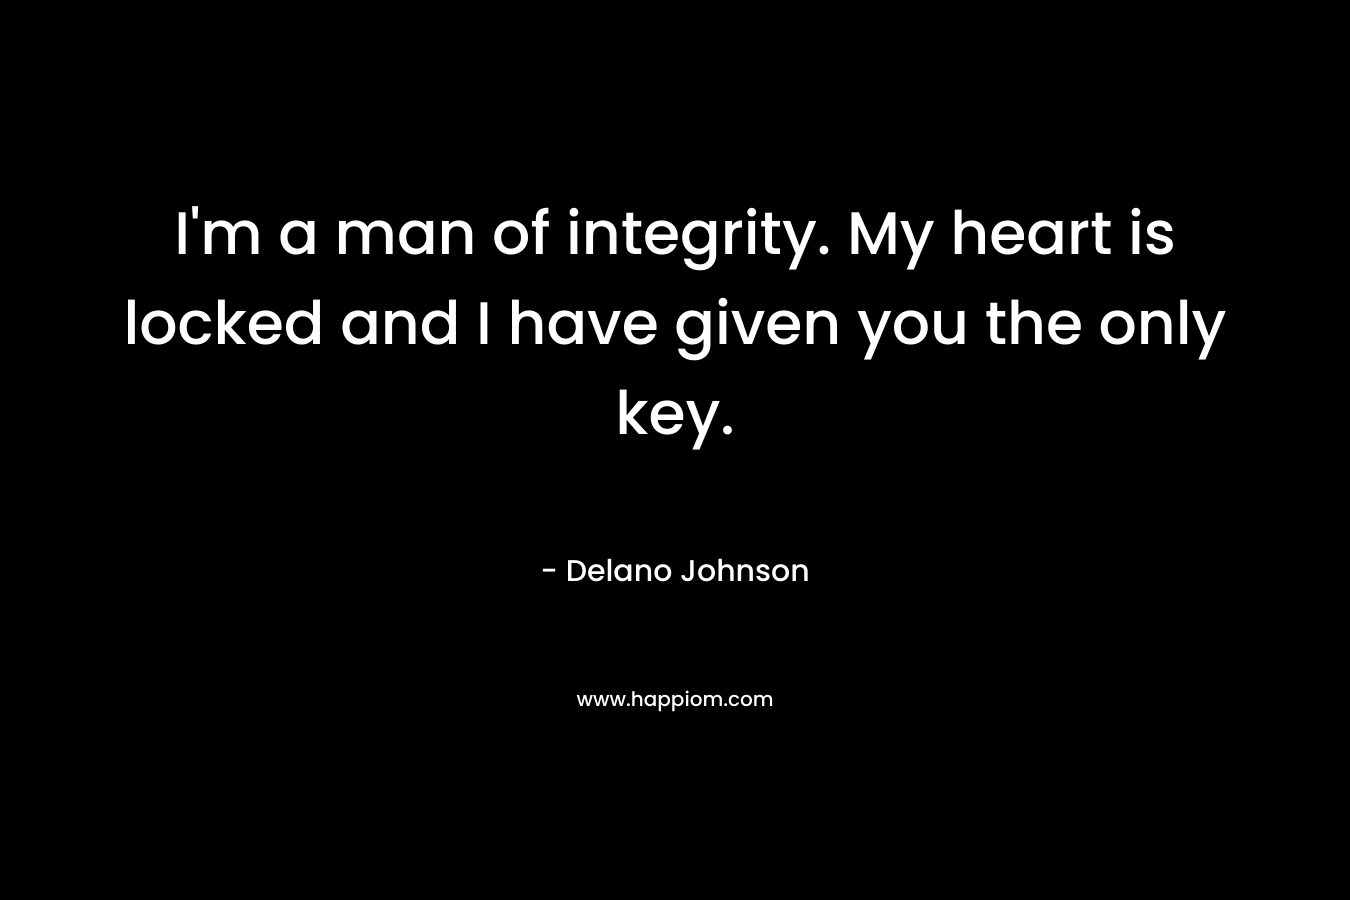 I’m a man of integrity. My heart is locked and I have given you the only key. – Delano Johnson